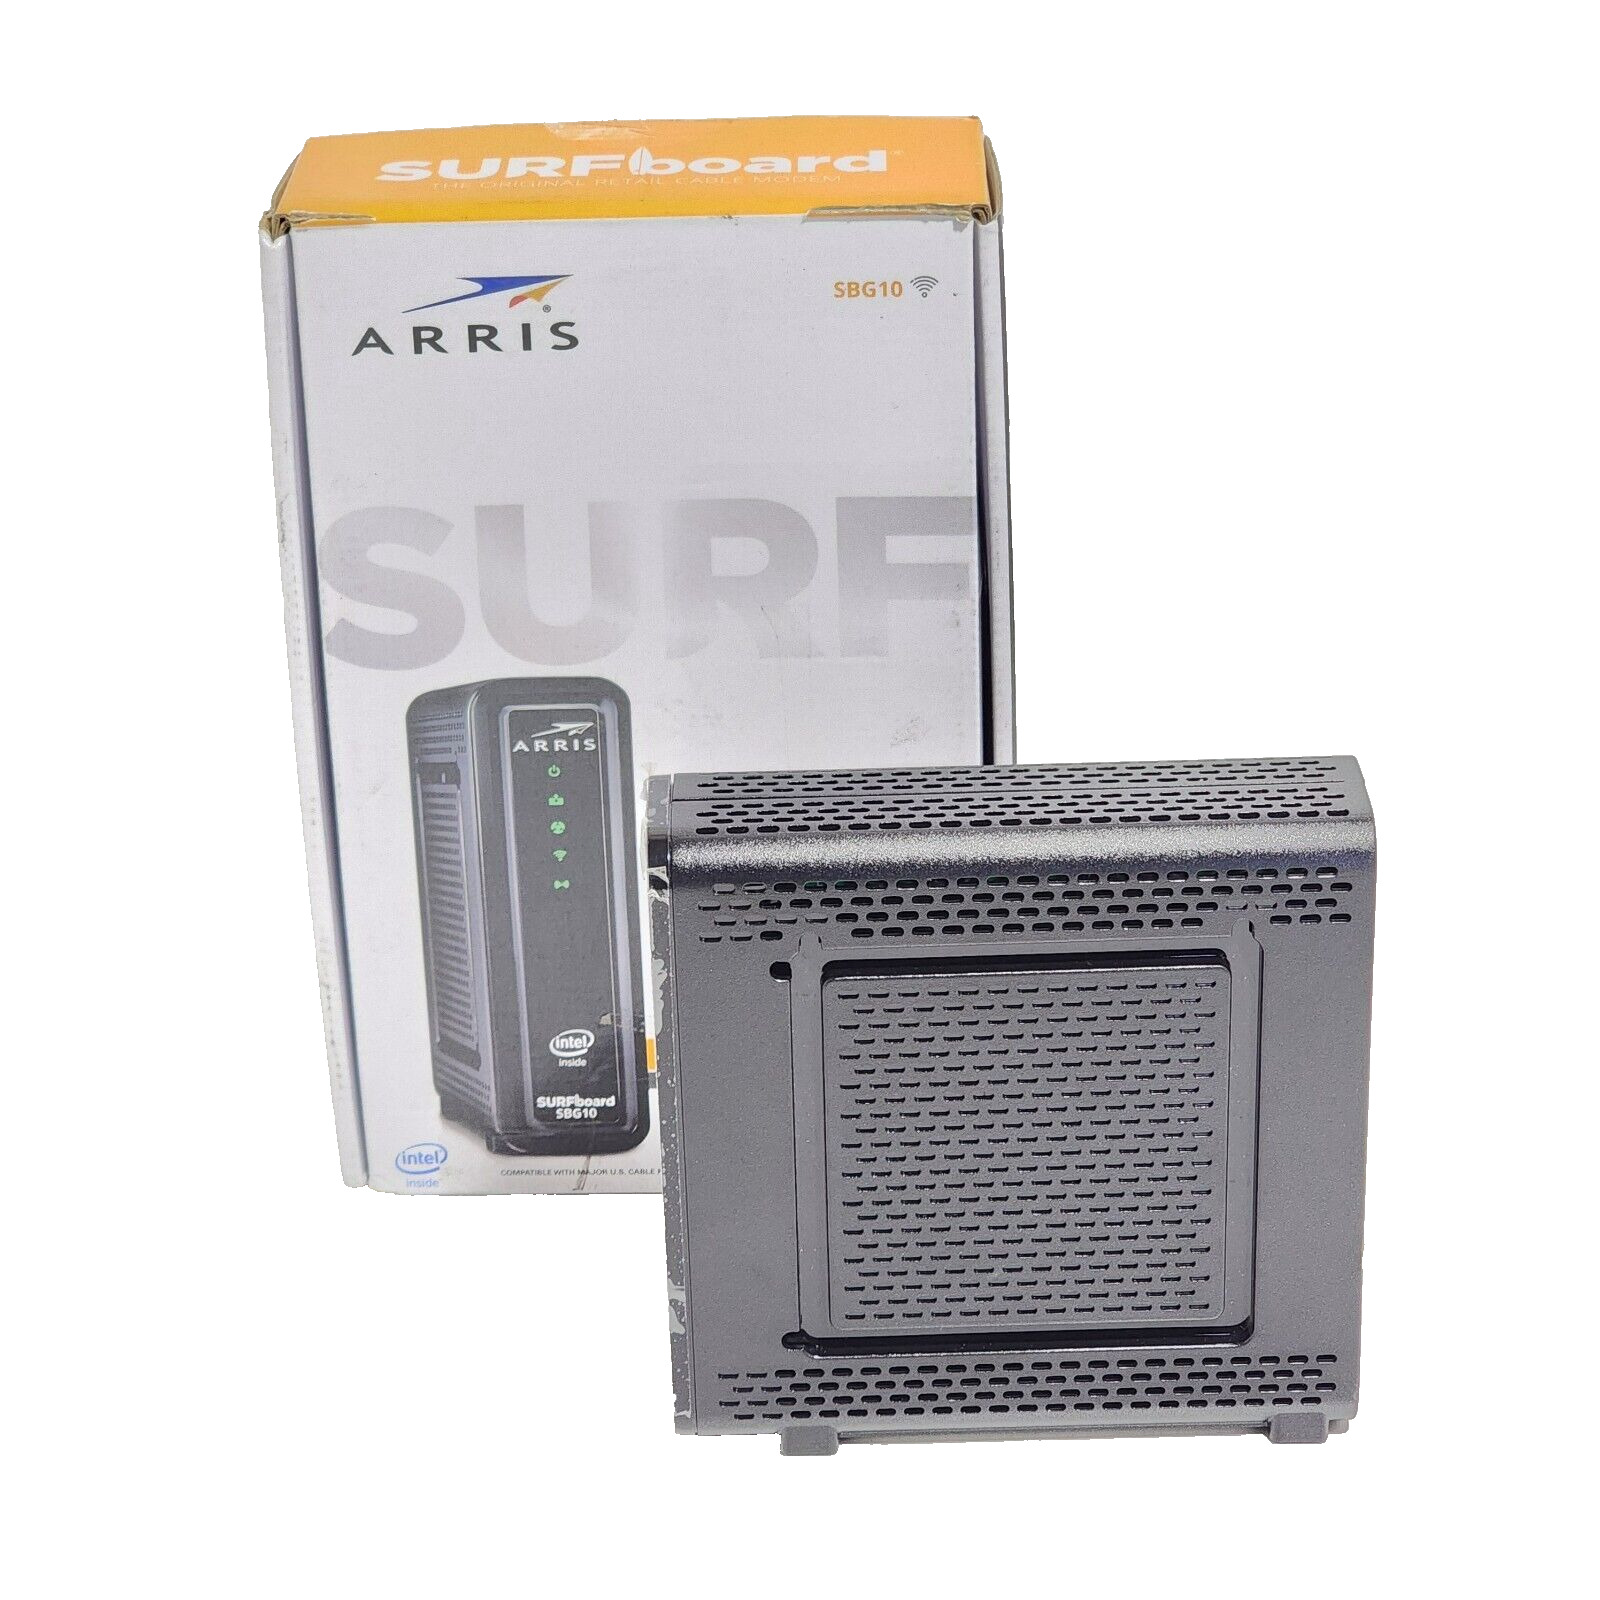 ARRIS SURFboard SBG10 DOCSIS 3.0 Cable Modem  only